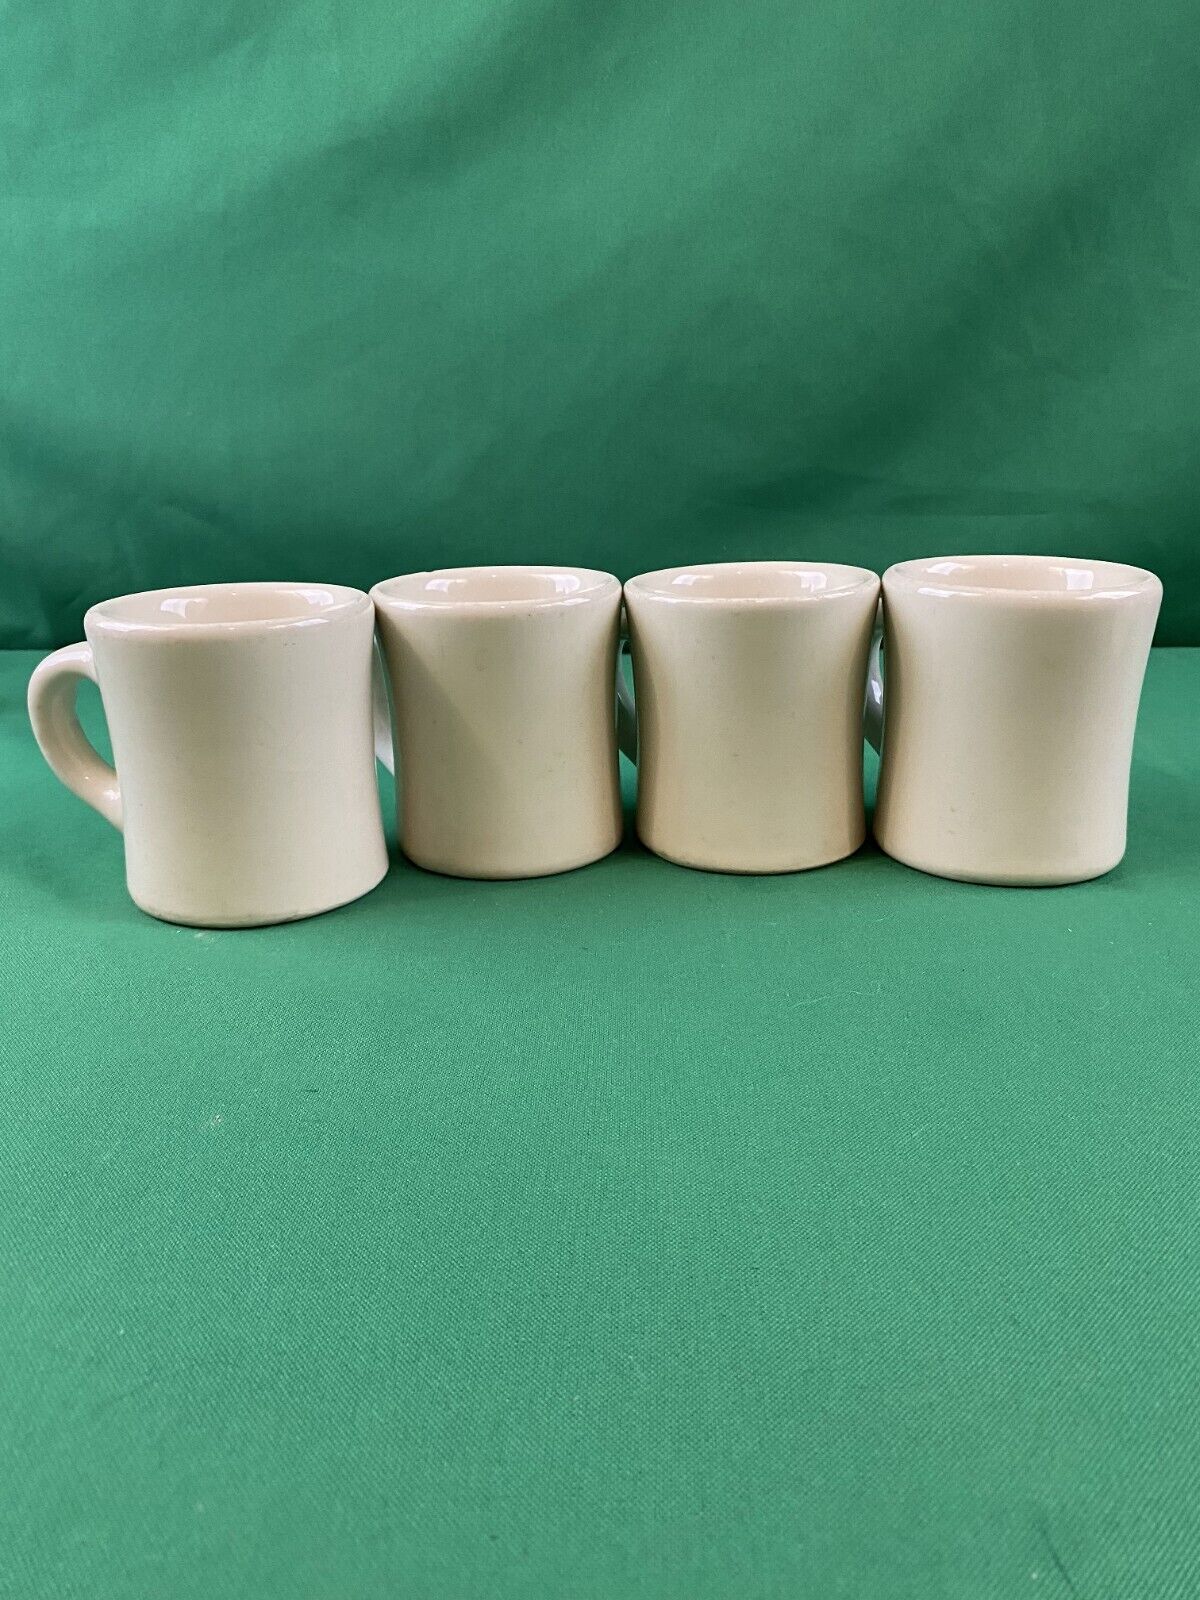 Lot of 4 Vintage VICTOR USA Diner Mugs Coffee Heavy Cup Restaurant Cream Ceramic